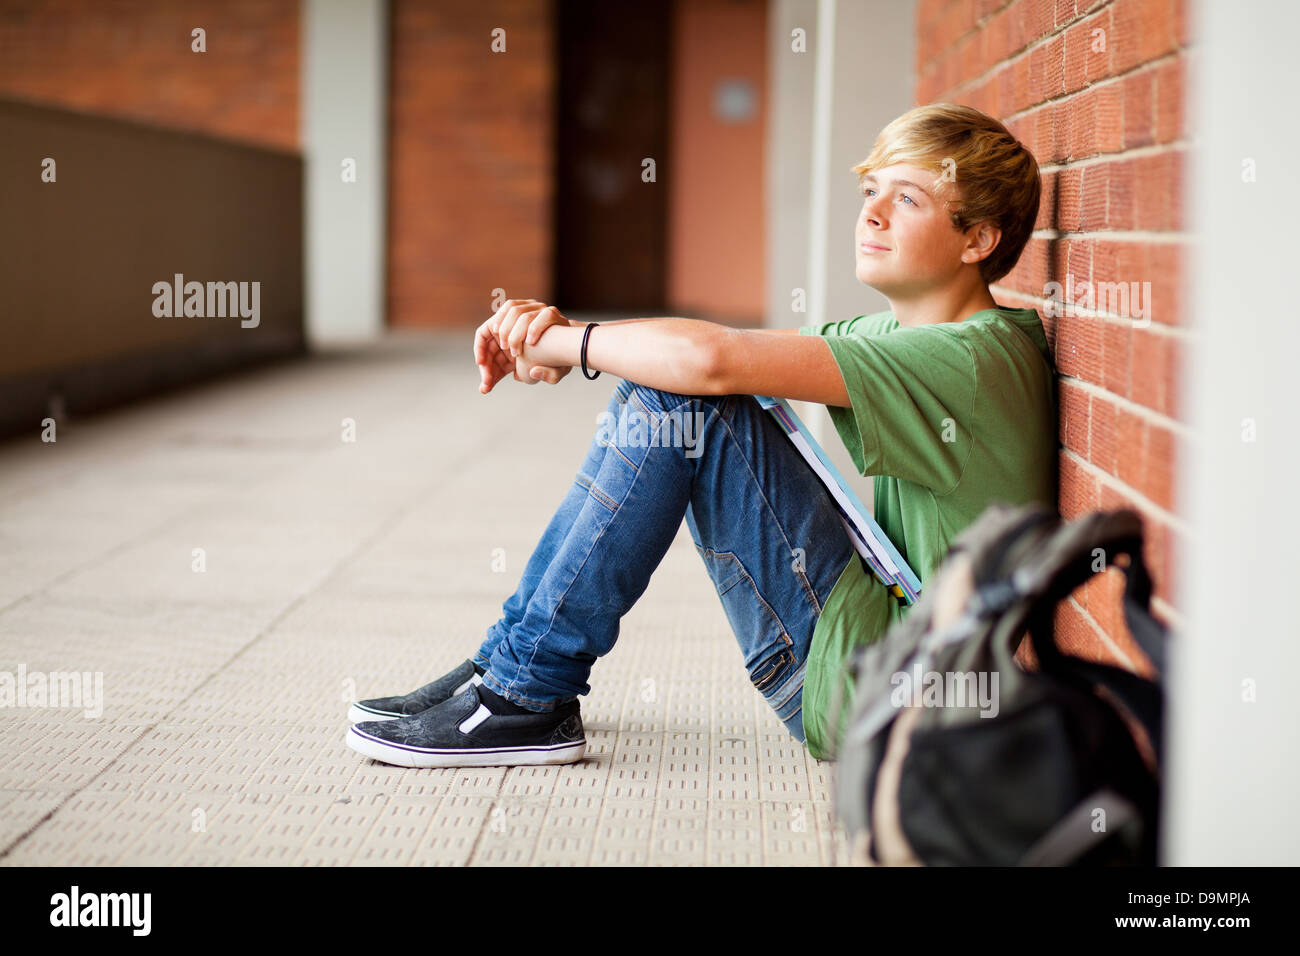 high school teen student daydreaming Stock Photo